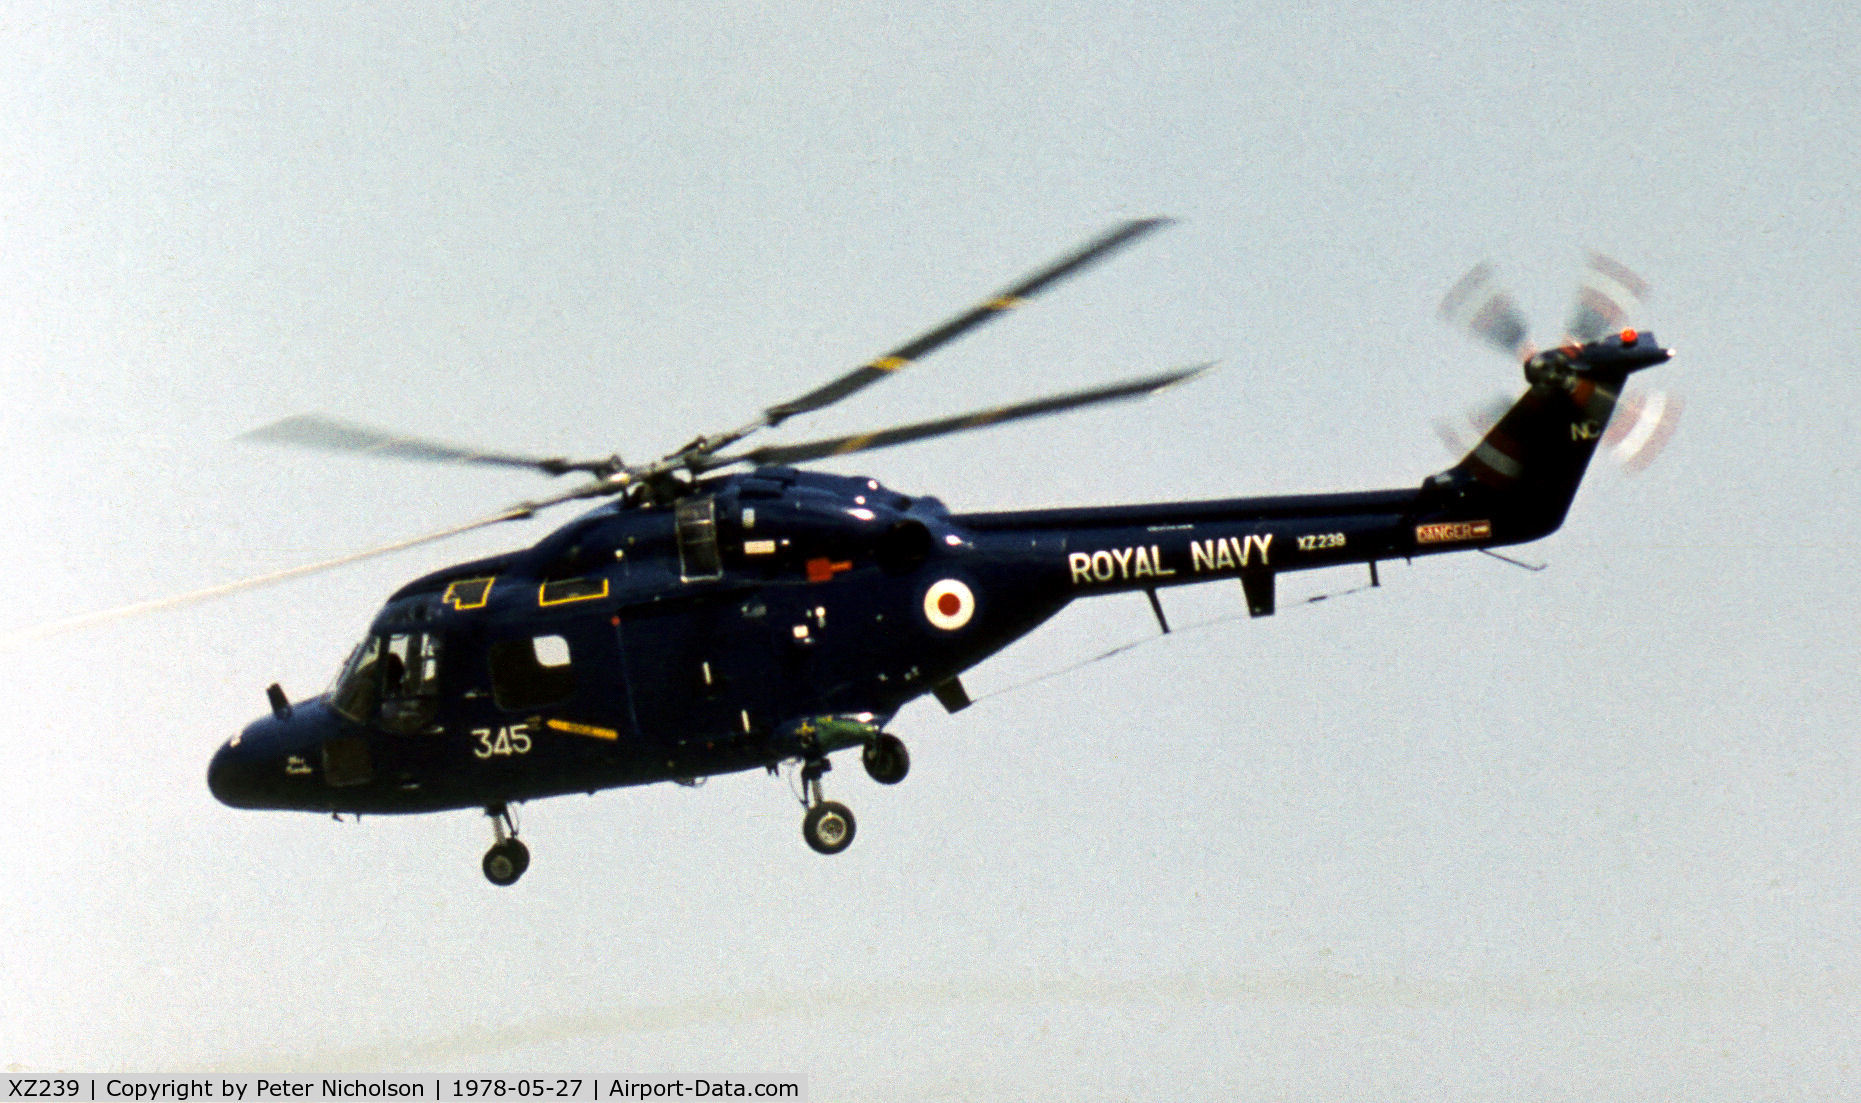 XZ239, 1977 Westland Lynx HAS.2 C/N 043, Lynx HAS.2 of 702 Squadron in action at the 1978 Bassingbourn Airshow.